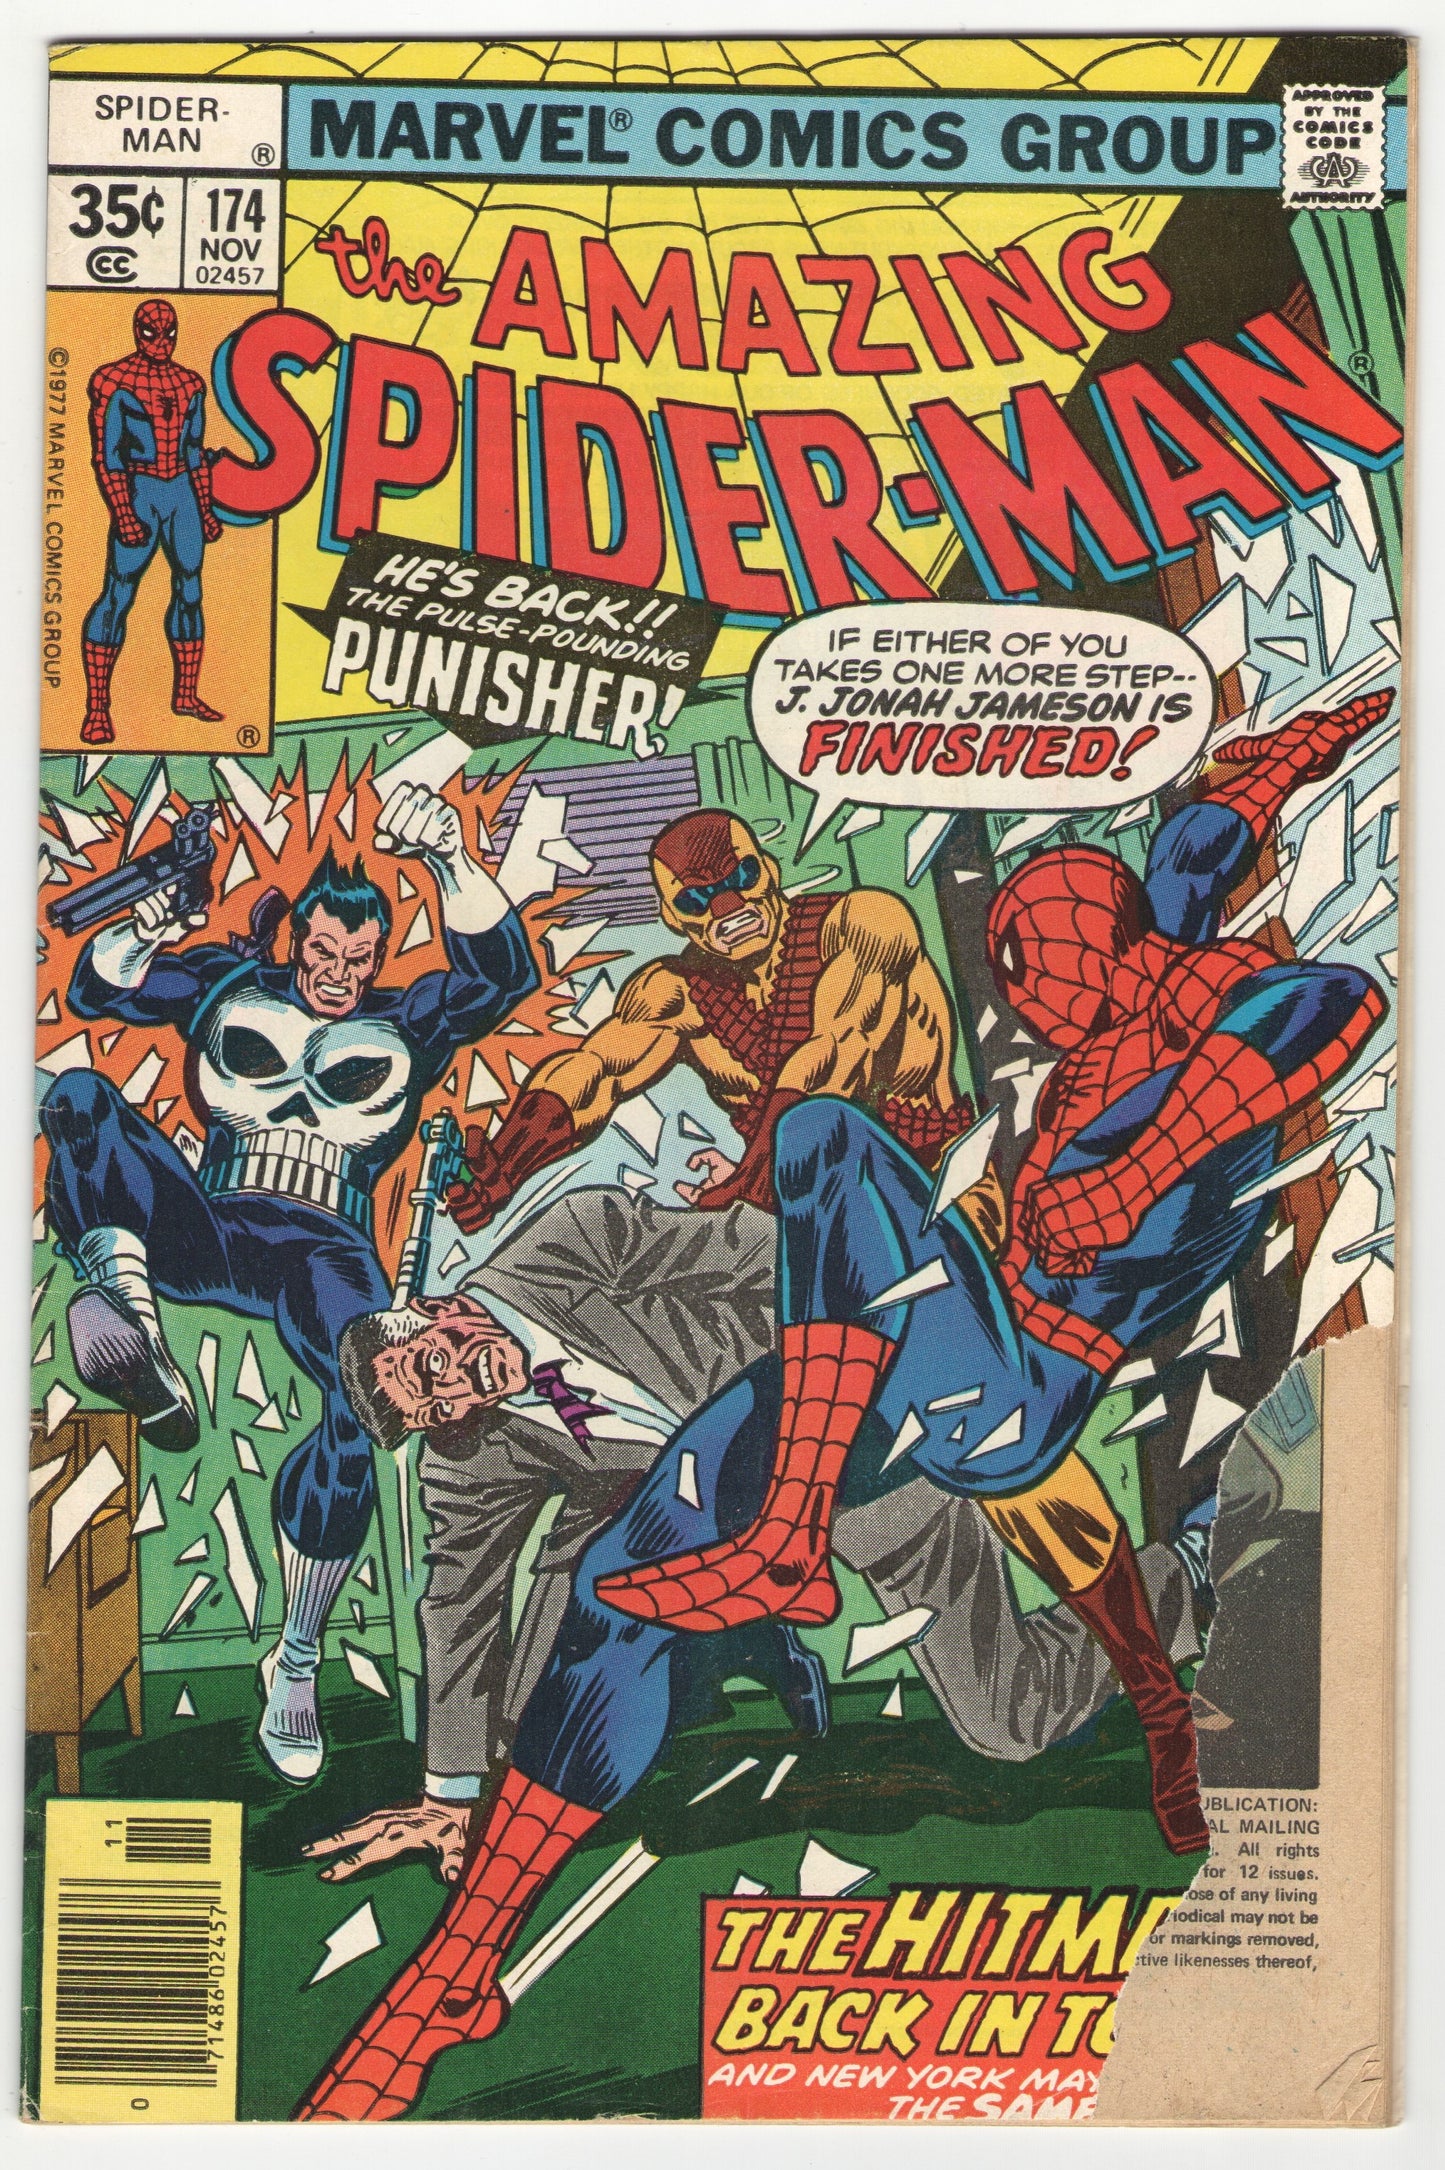 Amazing Spider-Man #174-175 (1977) Complete Story Arc